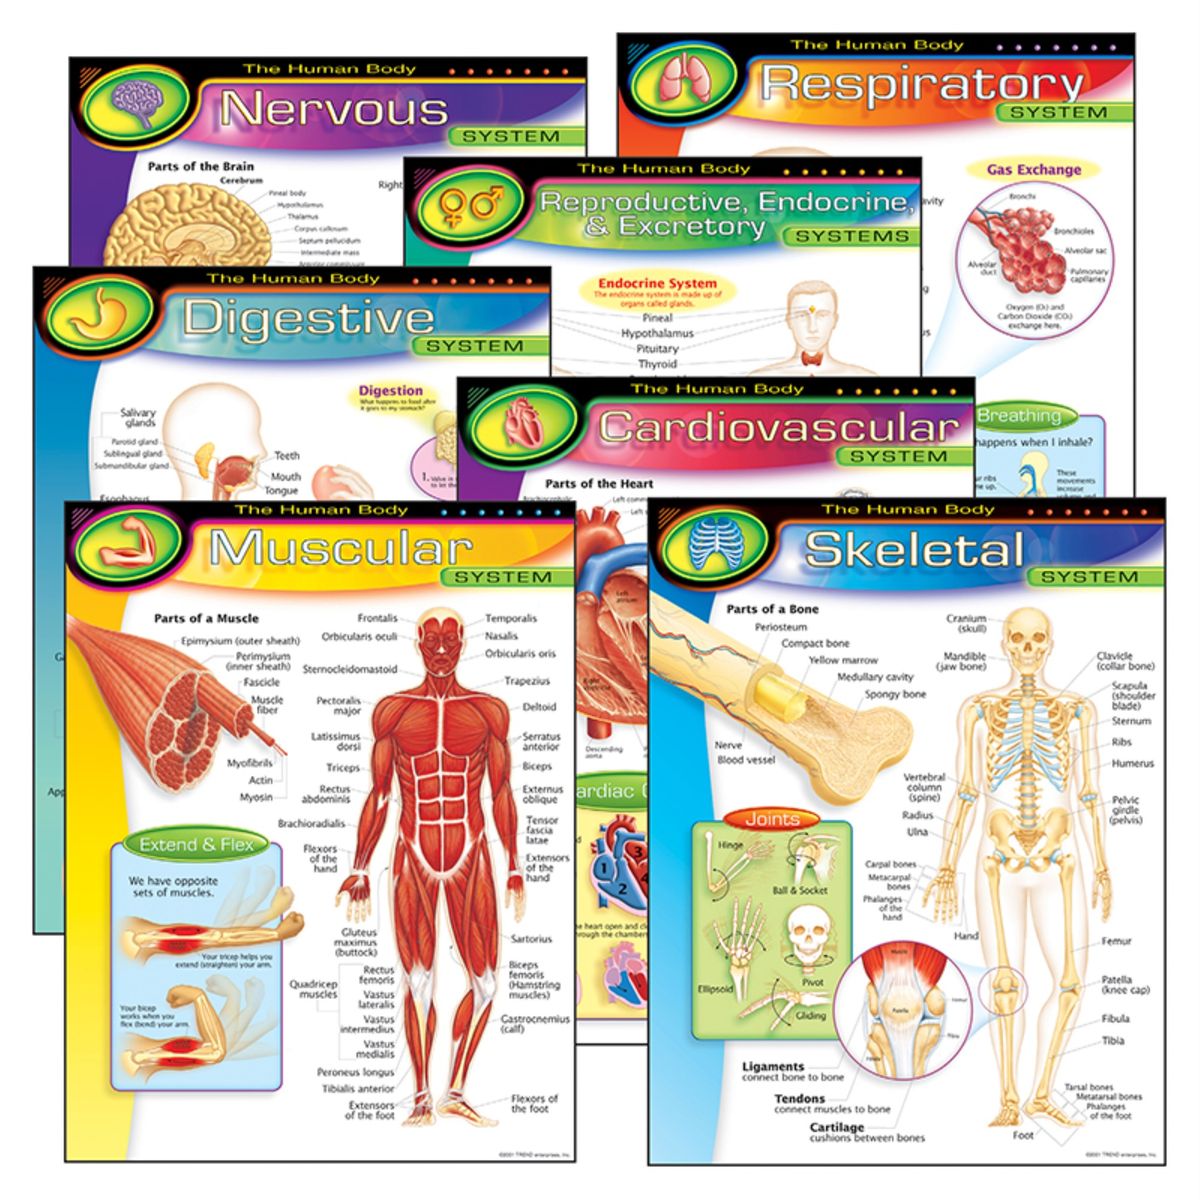 [RDY] [送料無料] 人体学習チャート コンボパック 7枚セット [楽天海外通販] | The Human Body Learning Charts Combo Pack, Set of 7